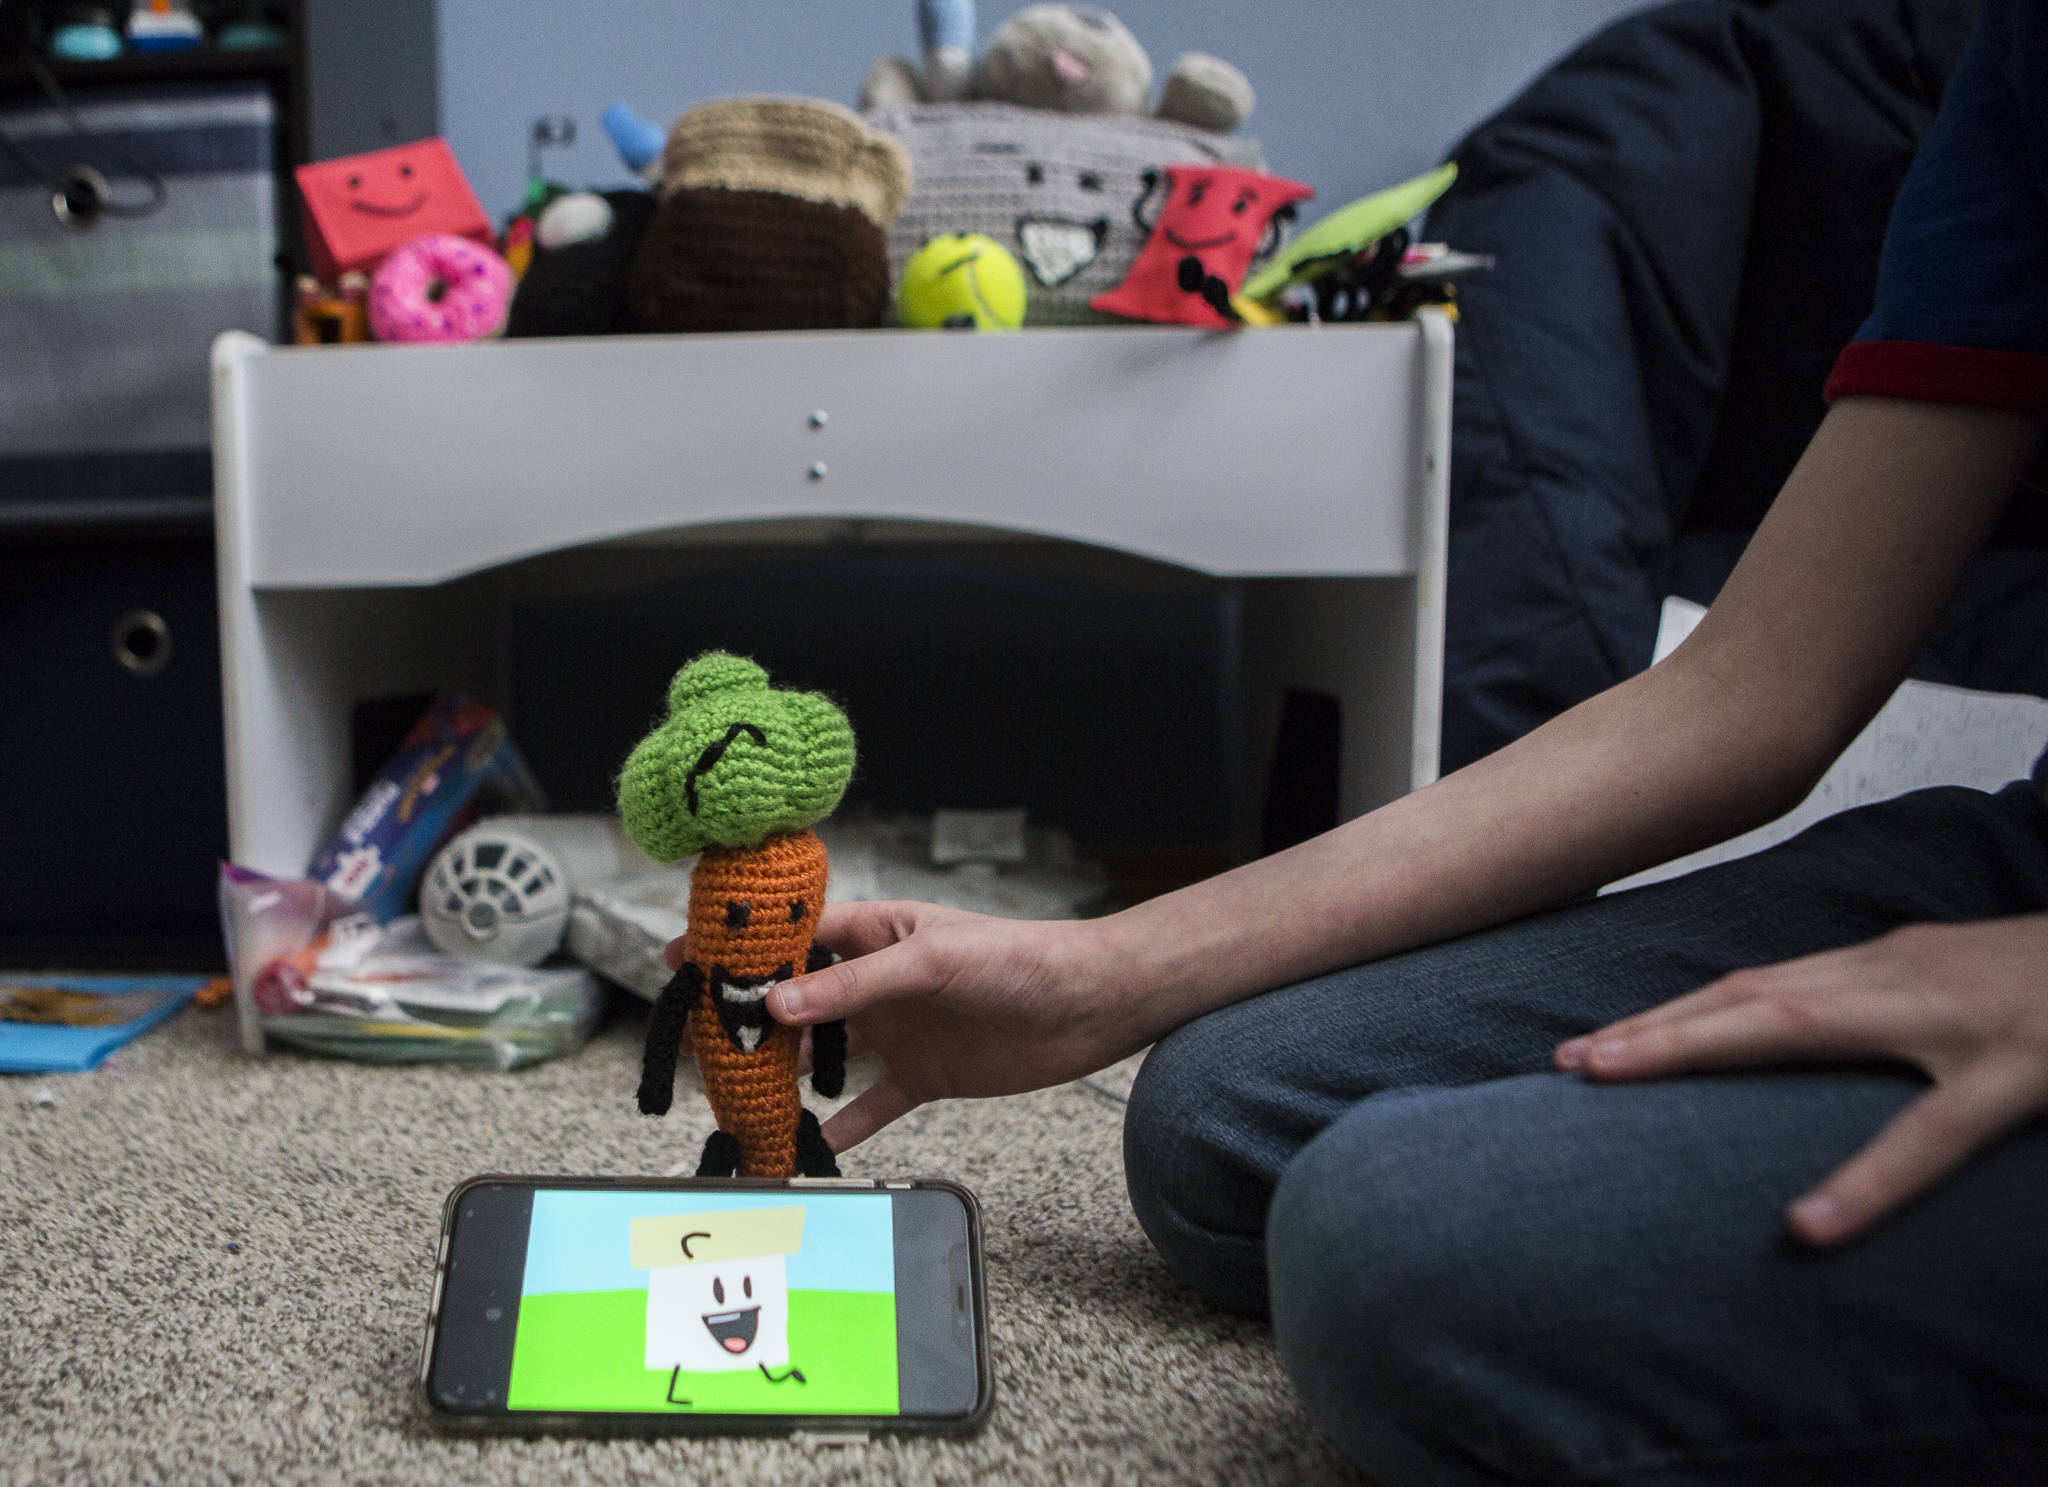 David Stowell’s animated YouTube series plays while he shows off some of his characters. (Olivia Vanni / The Herald)